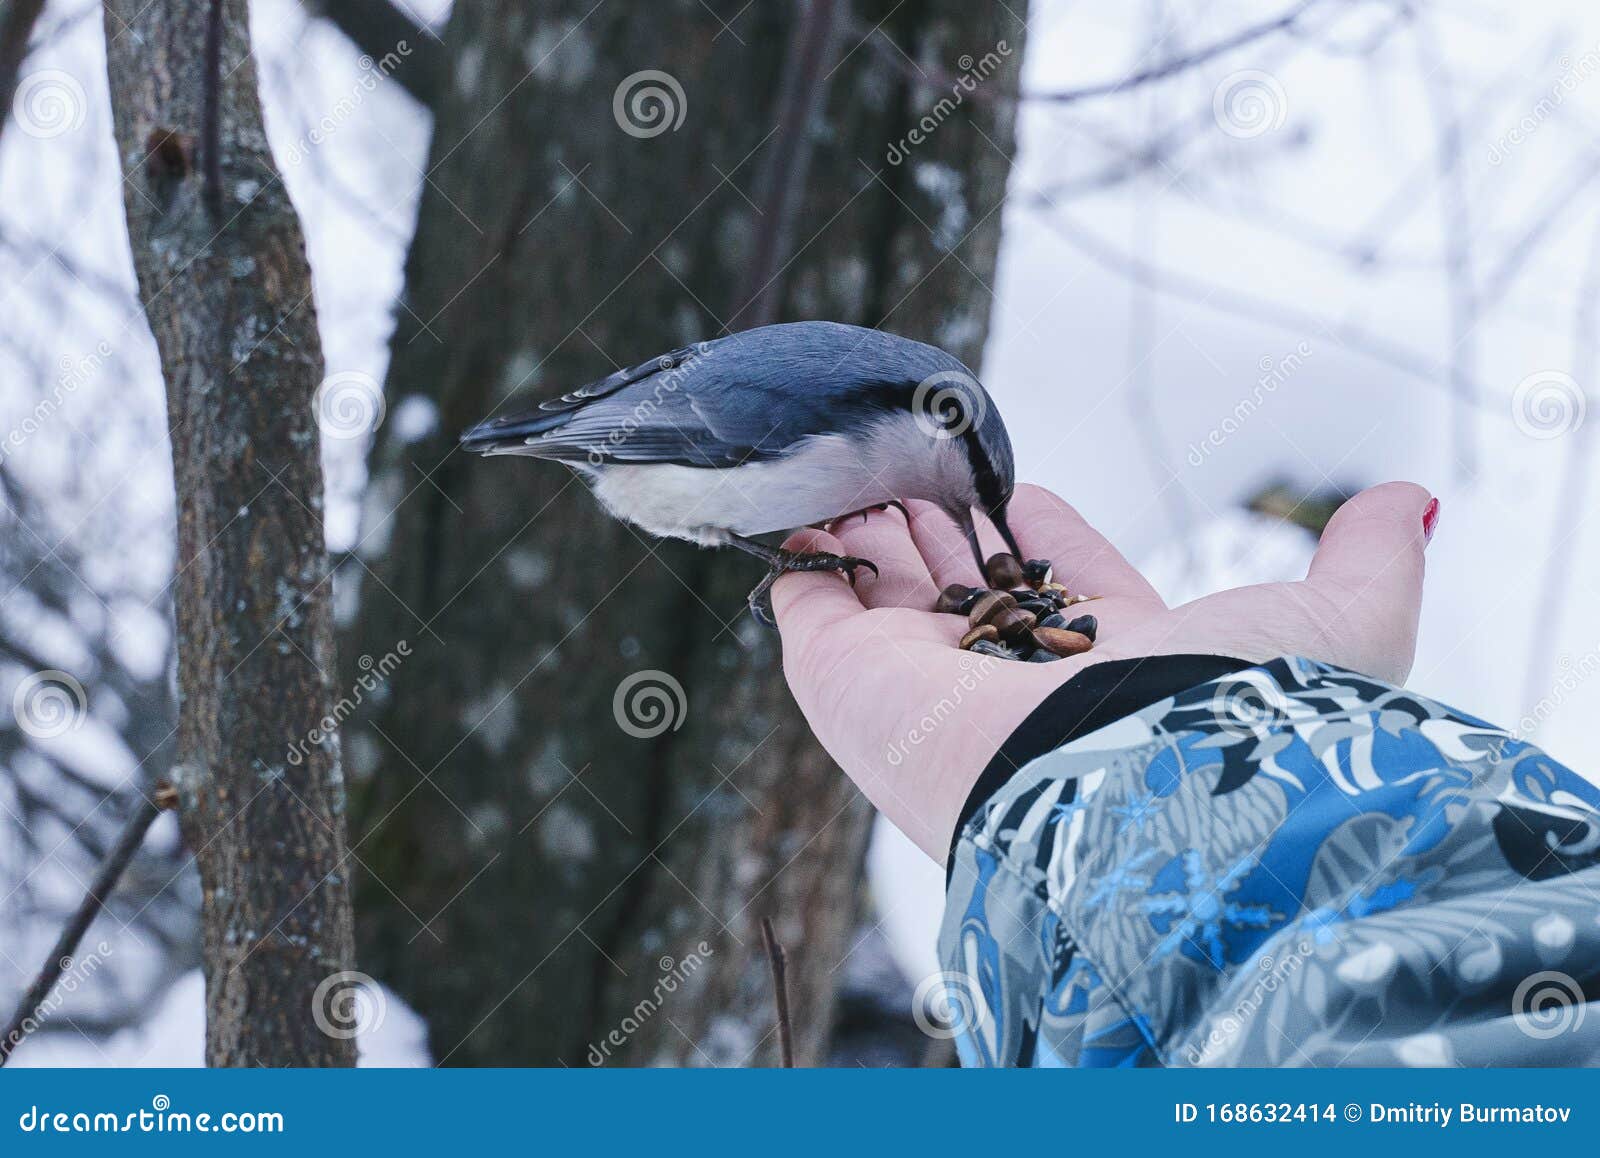 nuthatch peck pine nuts withe a hands